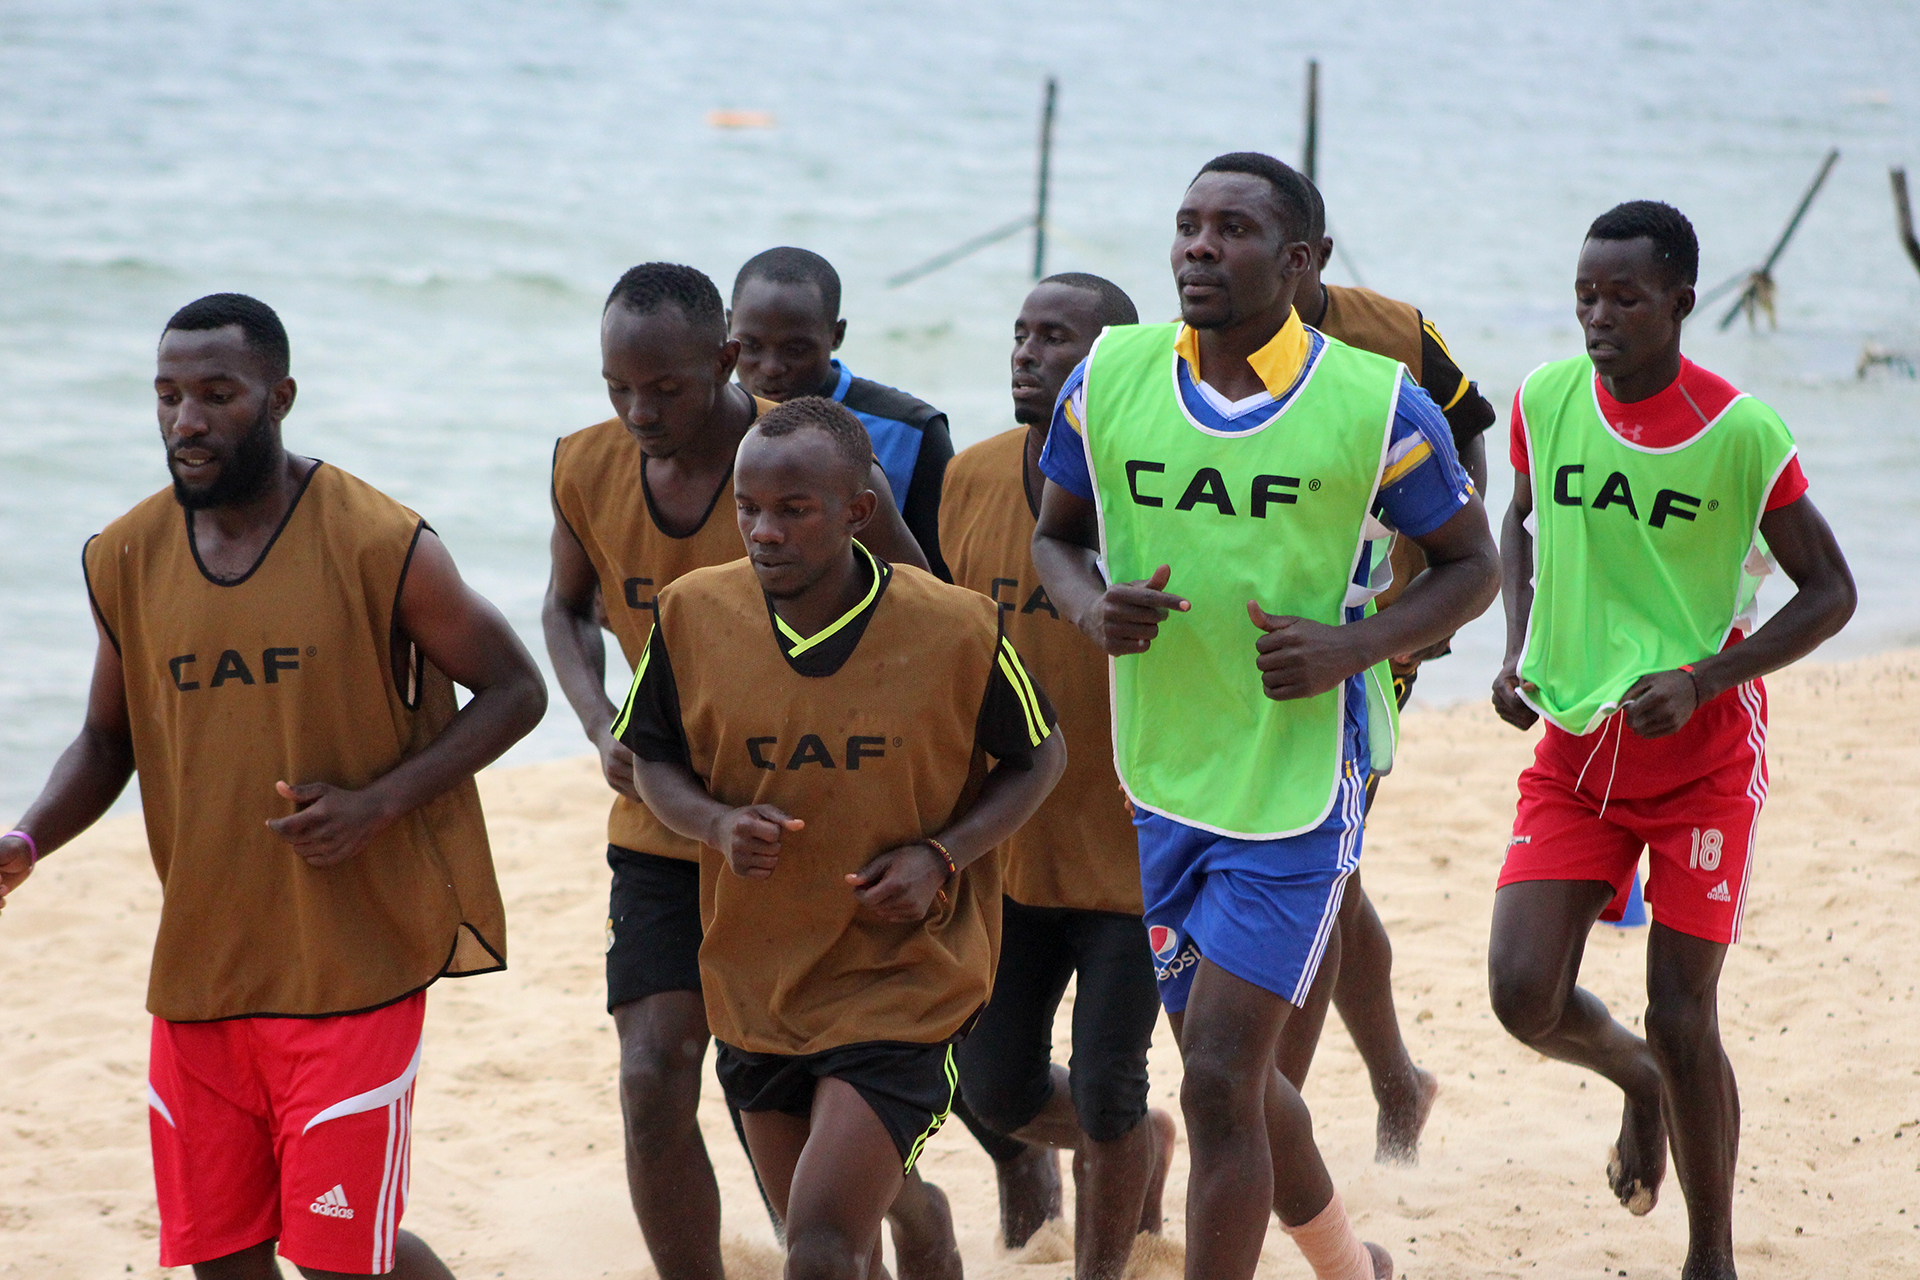 AFCON Beach Soccer 2018: Sand Cranes Prepare For Qualifier Against Ivory Coast